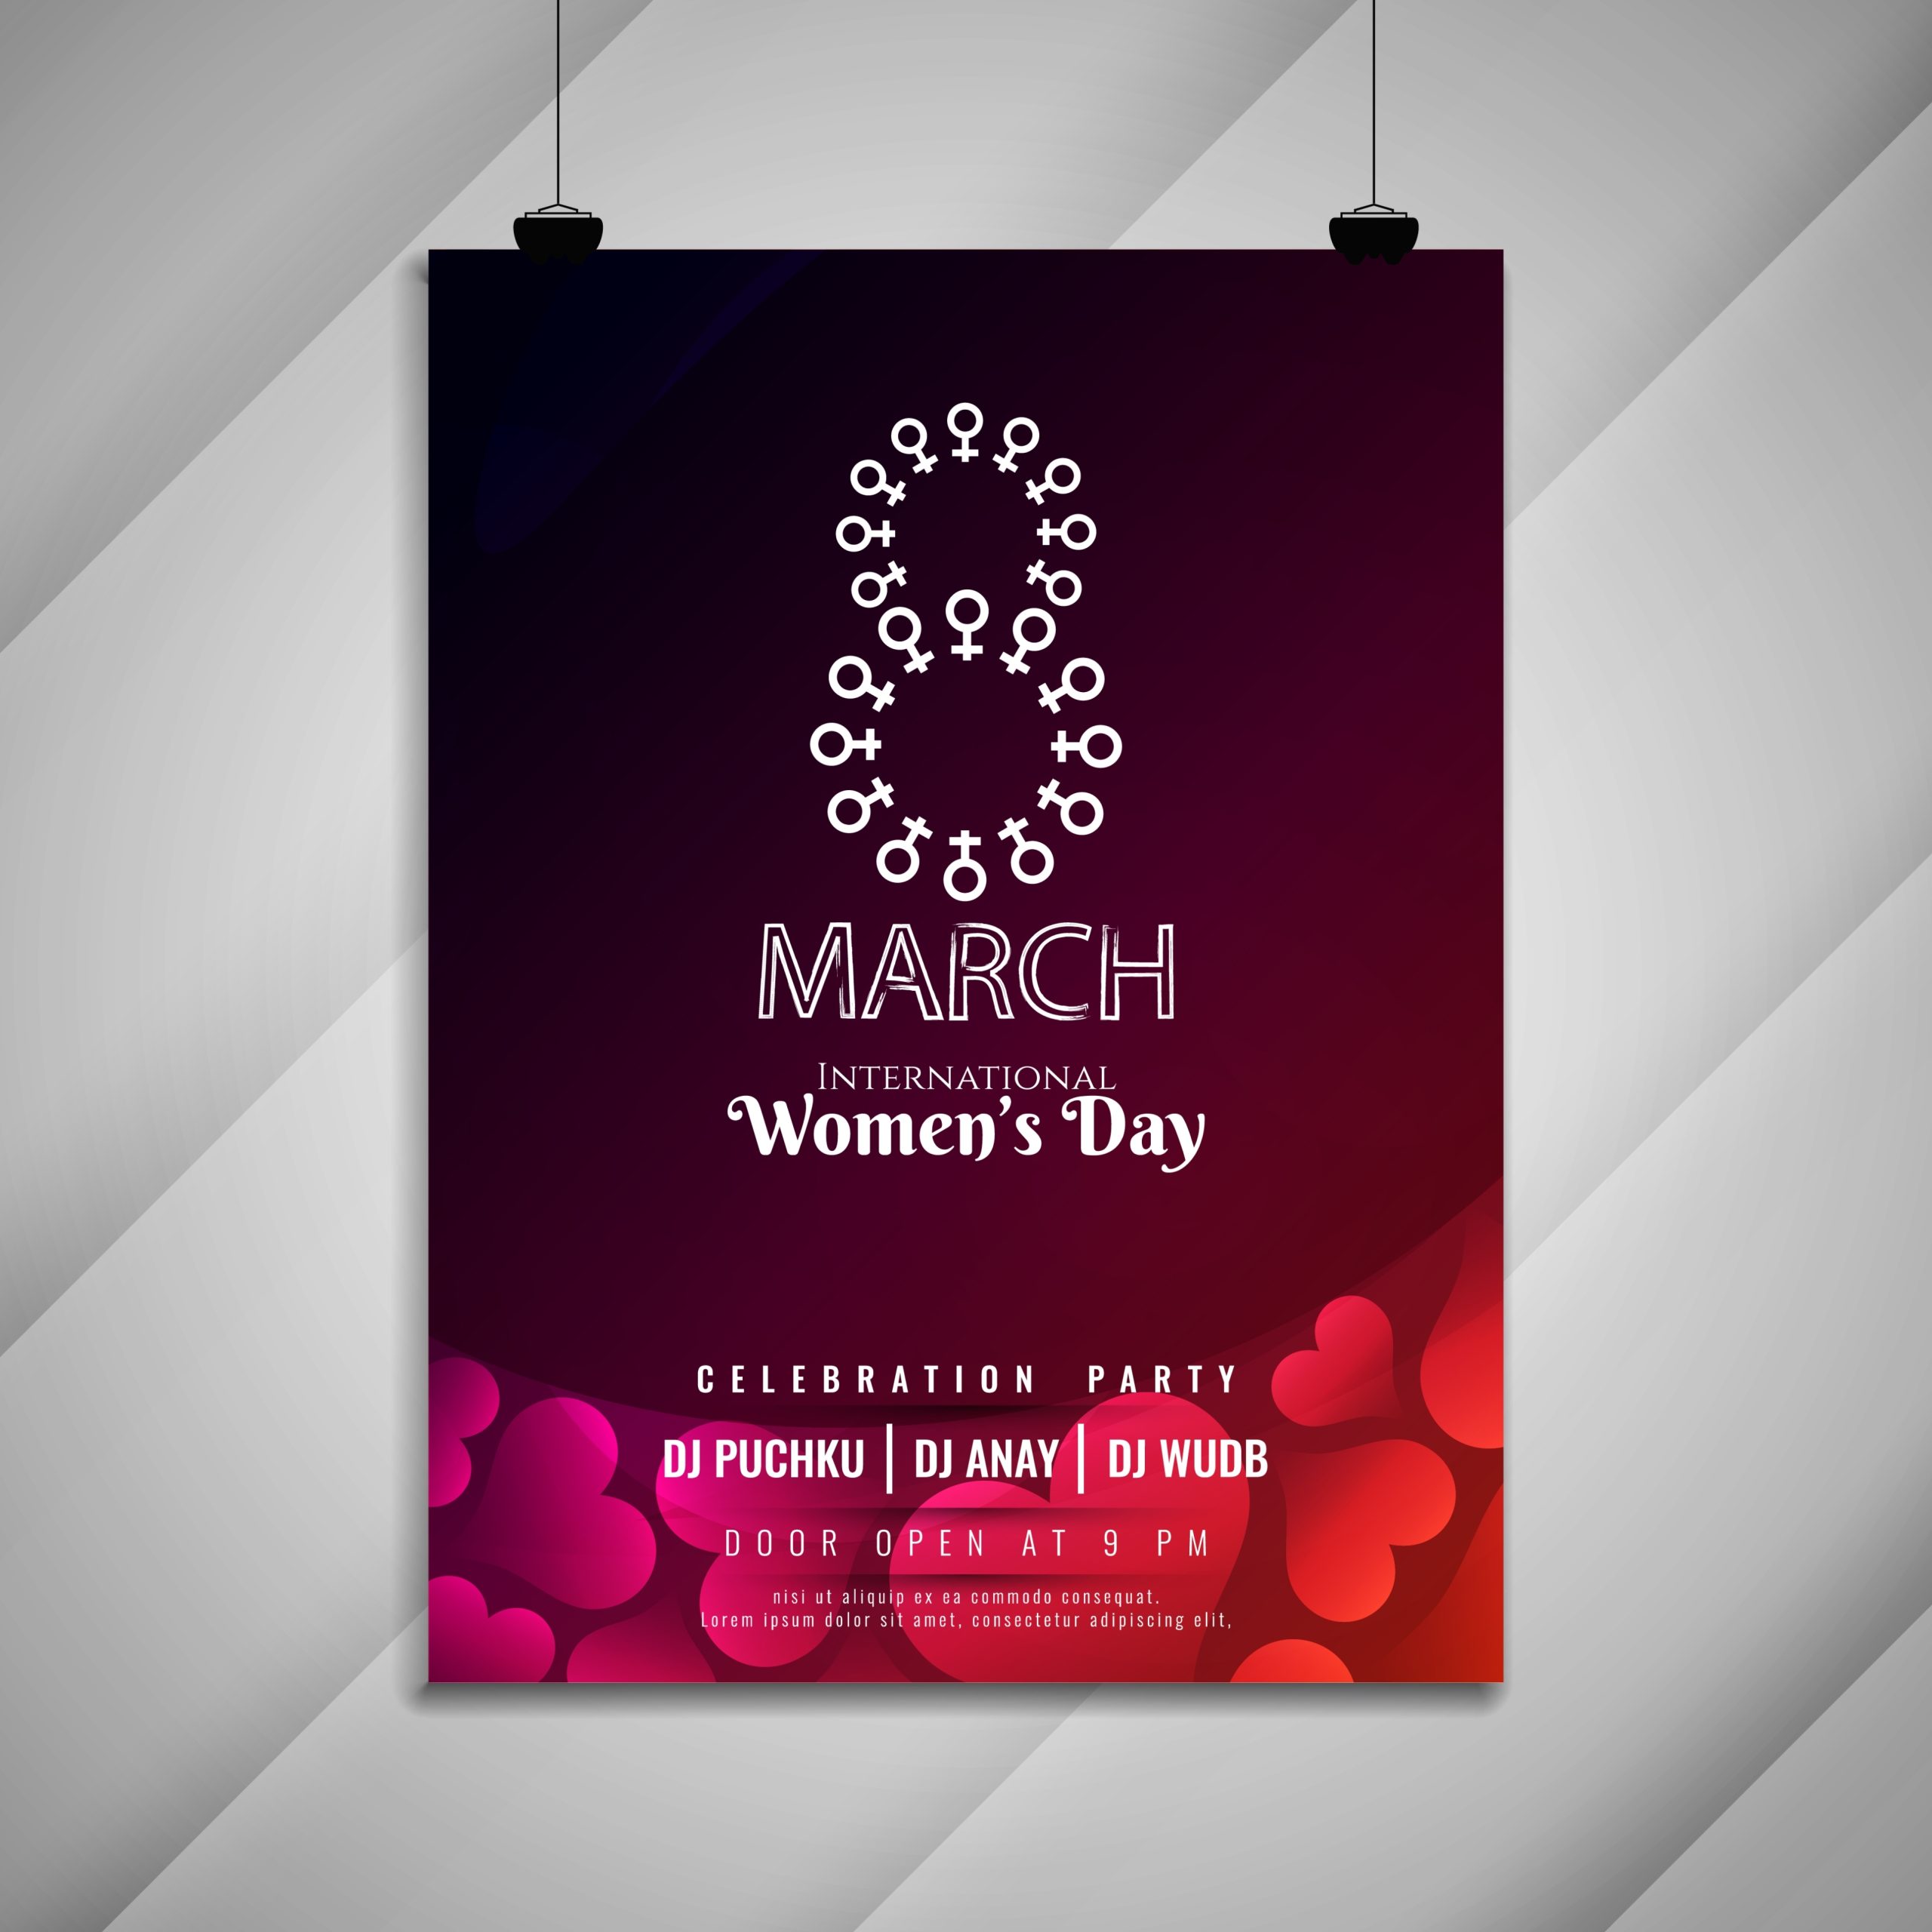 Abstract Elegant Women'S Day Celebration Party Invitation Card Template 281012 Vector Art At Within Event Invitation Card Template